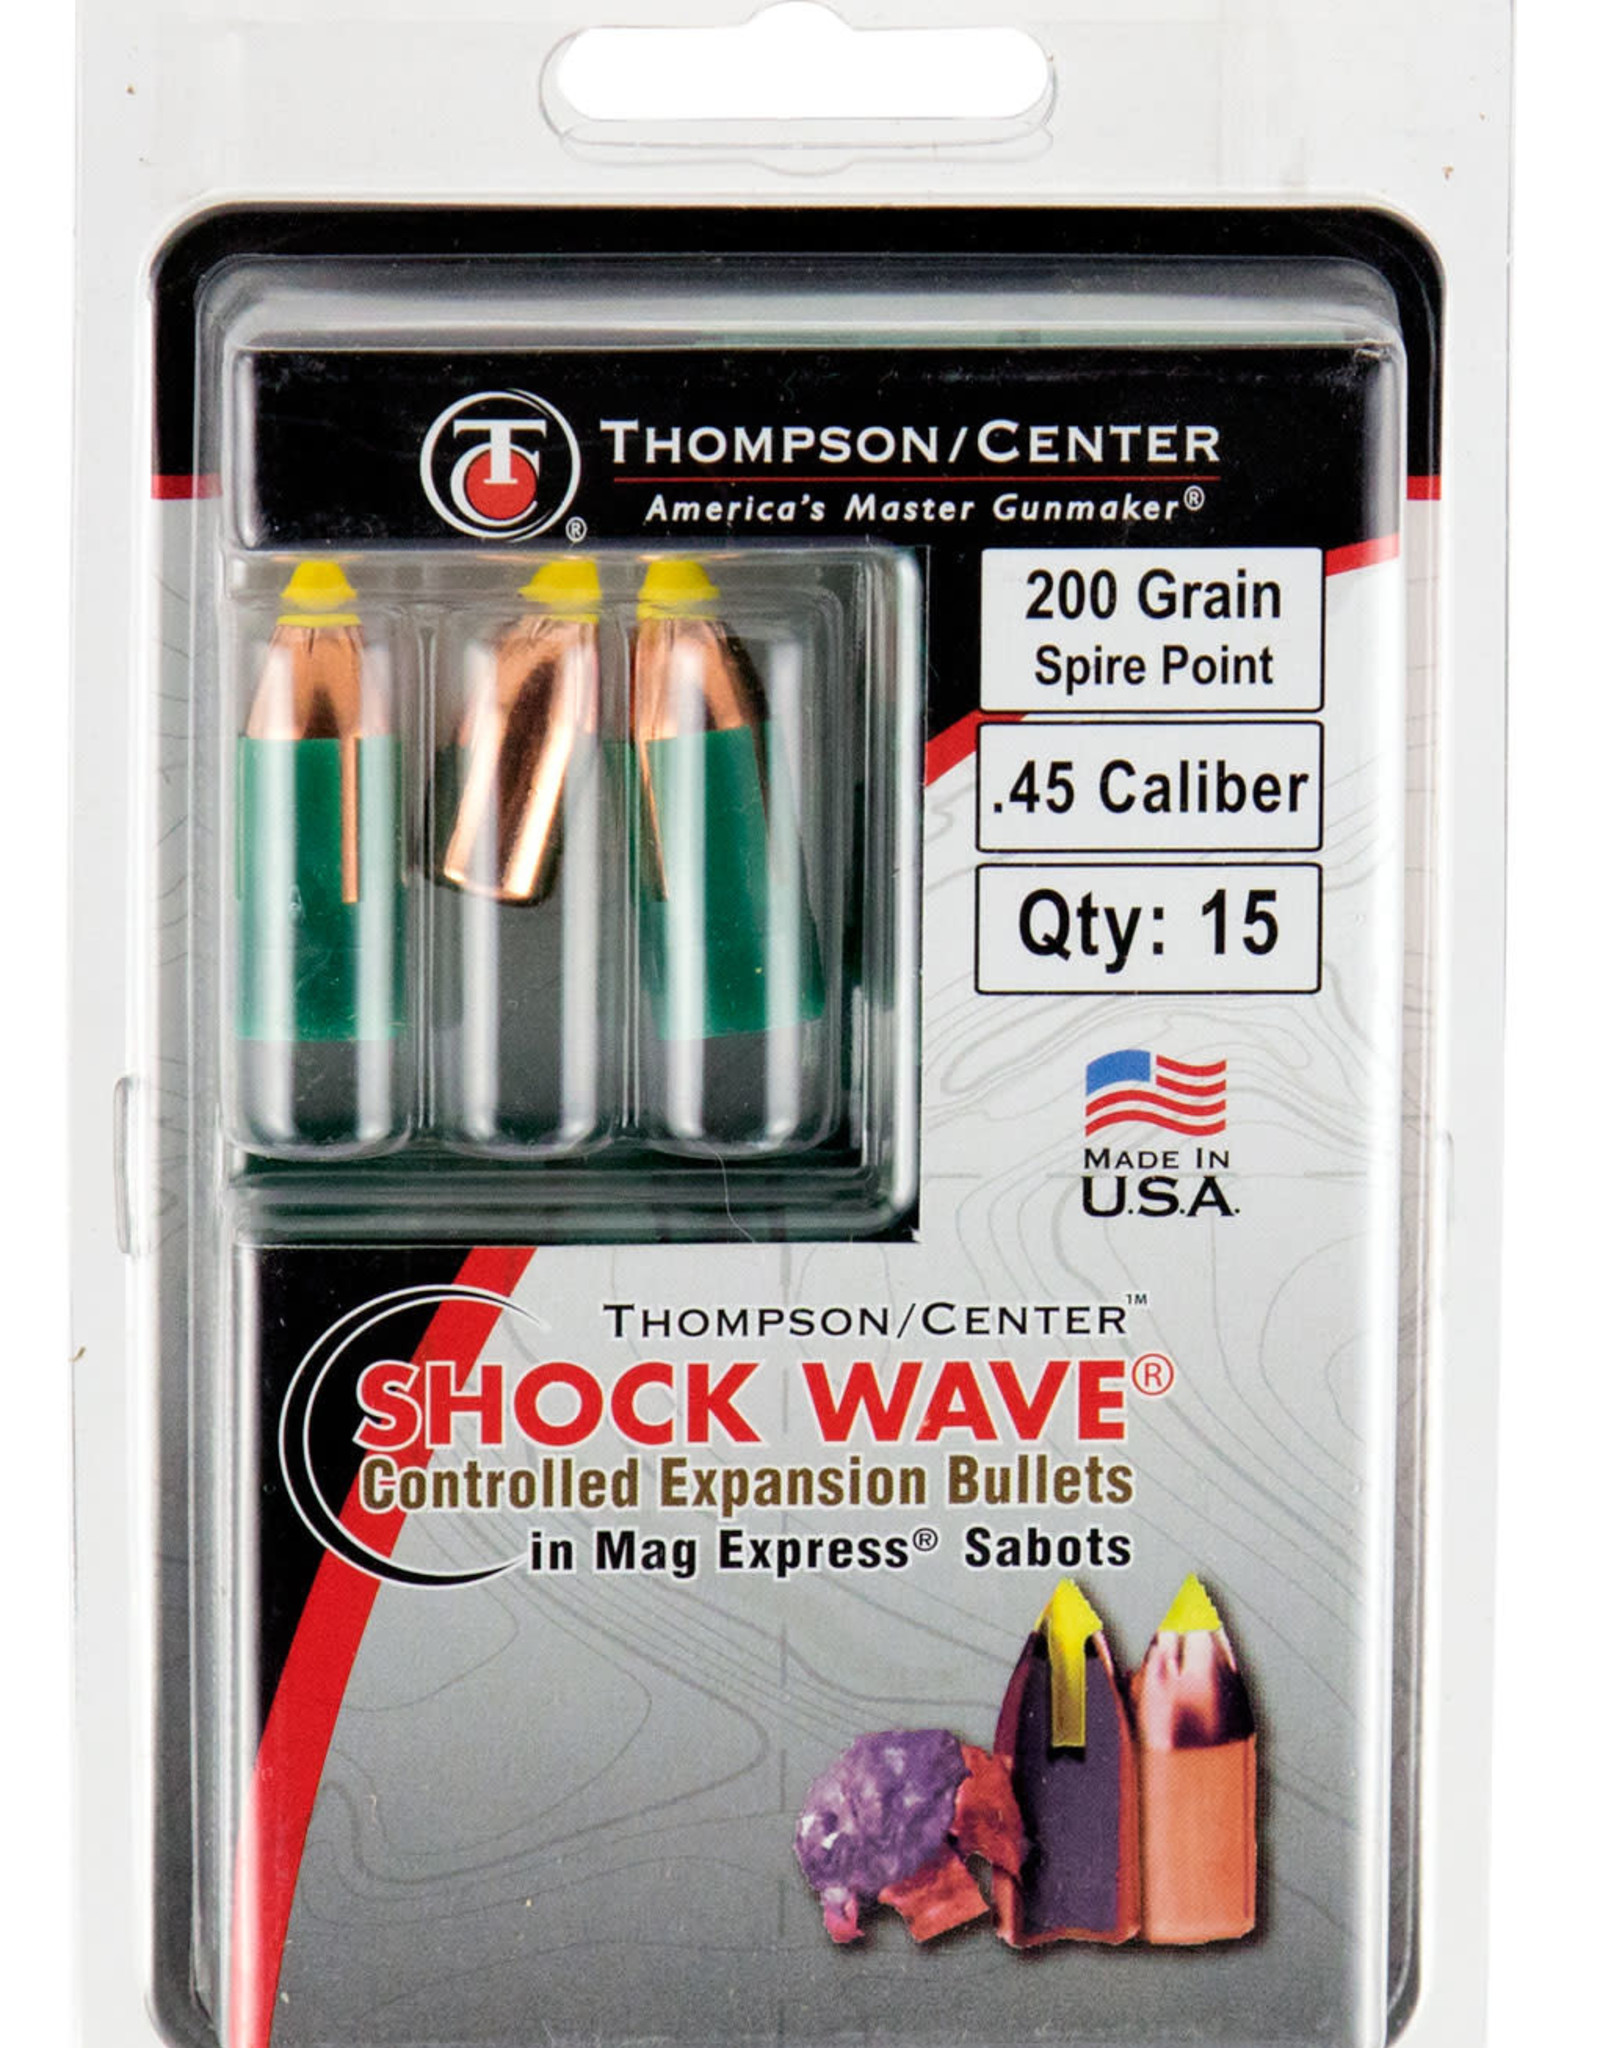 Thompson Center Shock Wave Controlled Expansion Bullets 15 pc